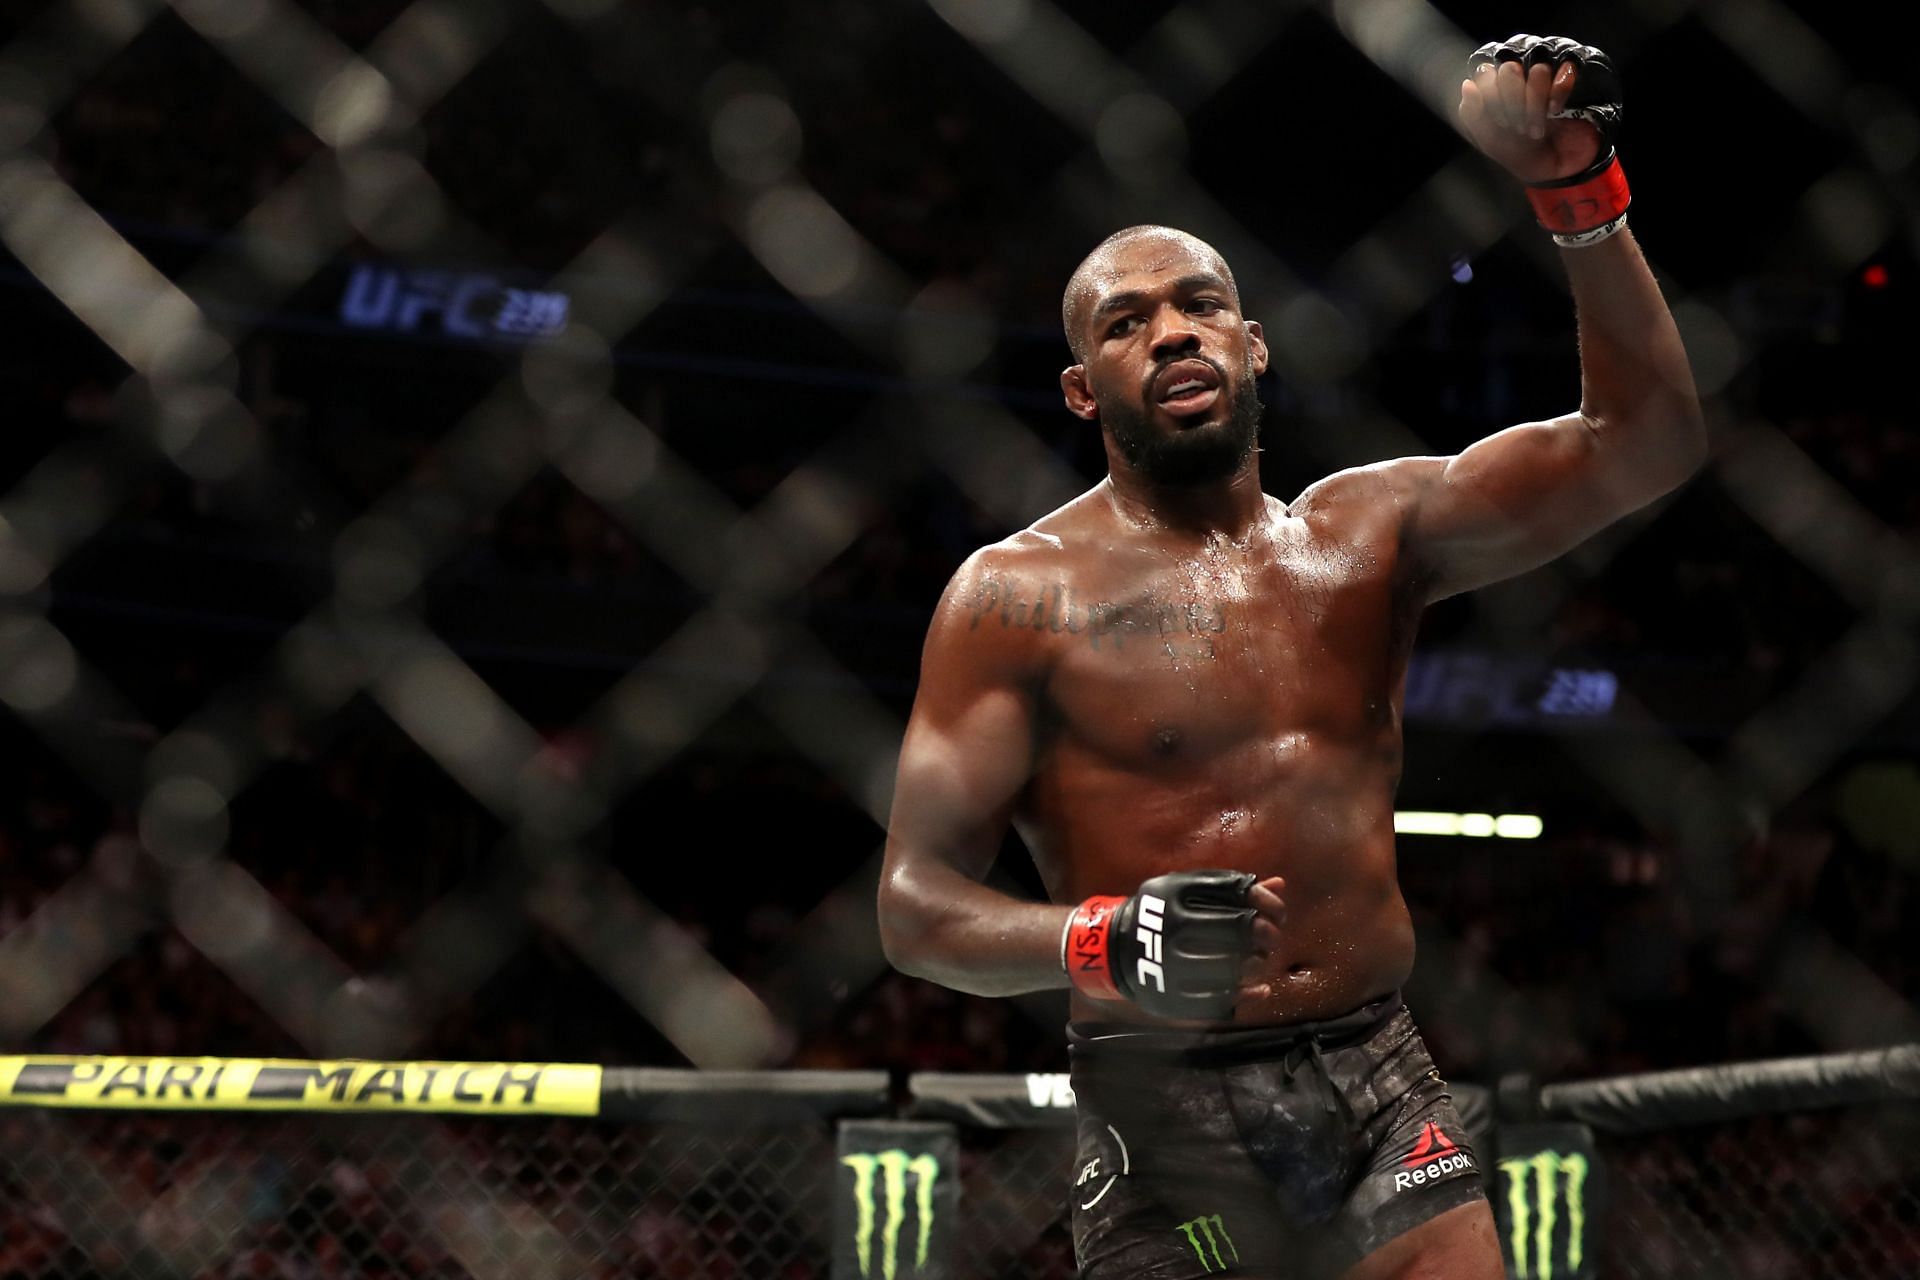 Can Jon Jones become a two-division champion when he faces Ciryl Gane for the heavyweight title in March?